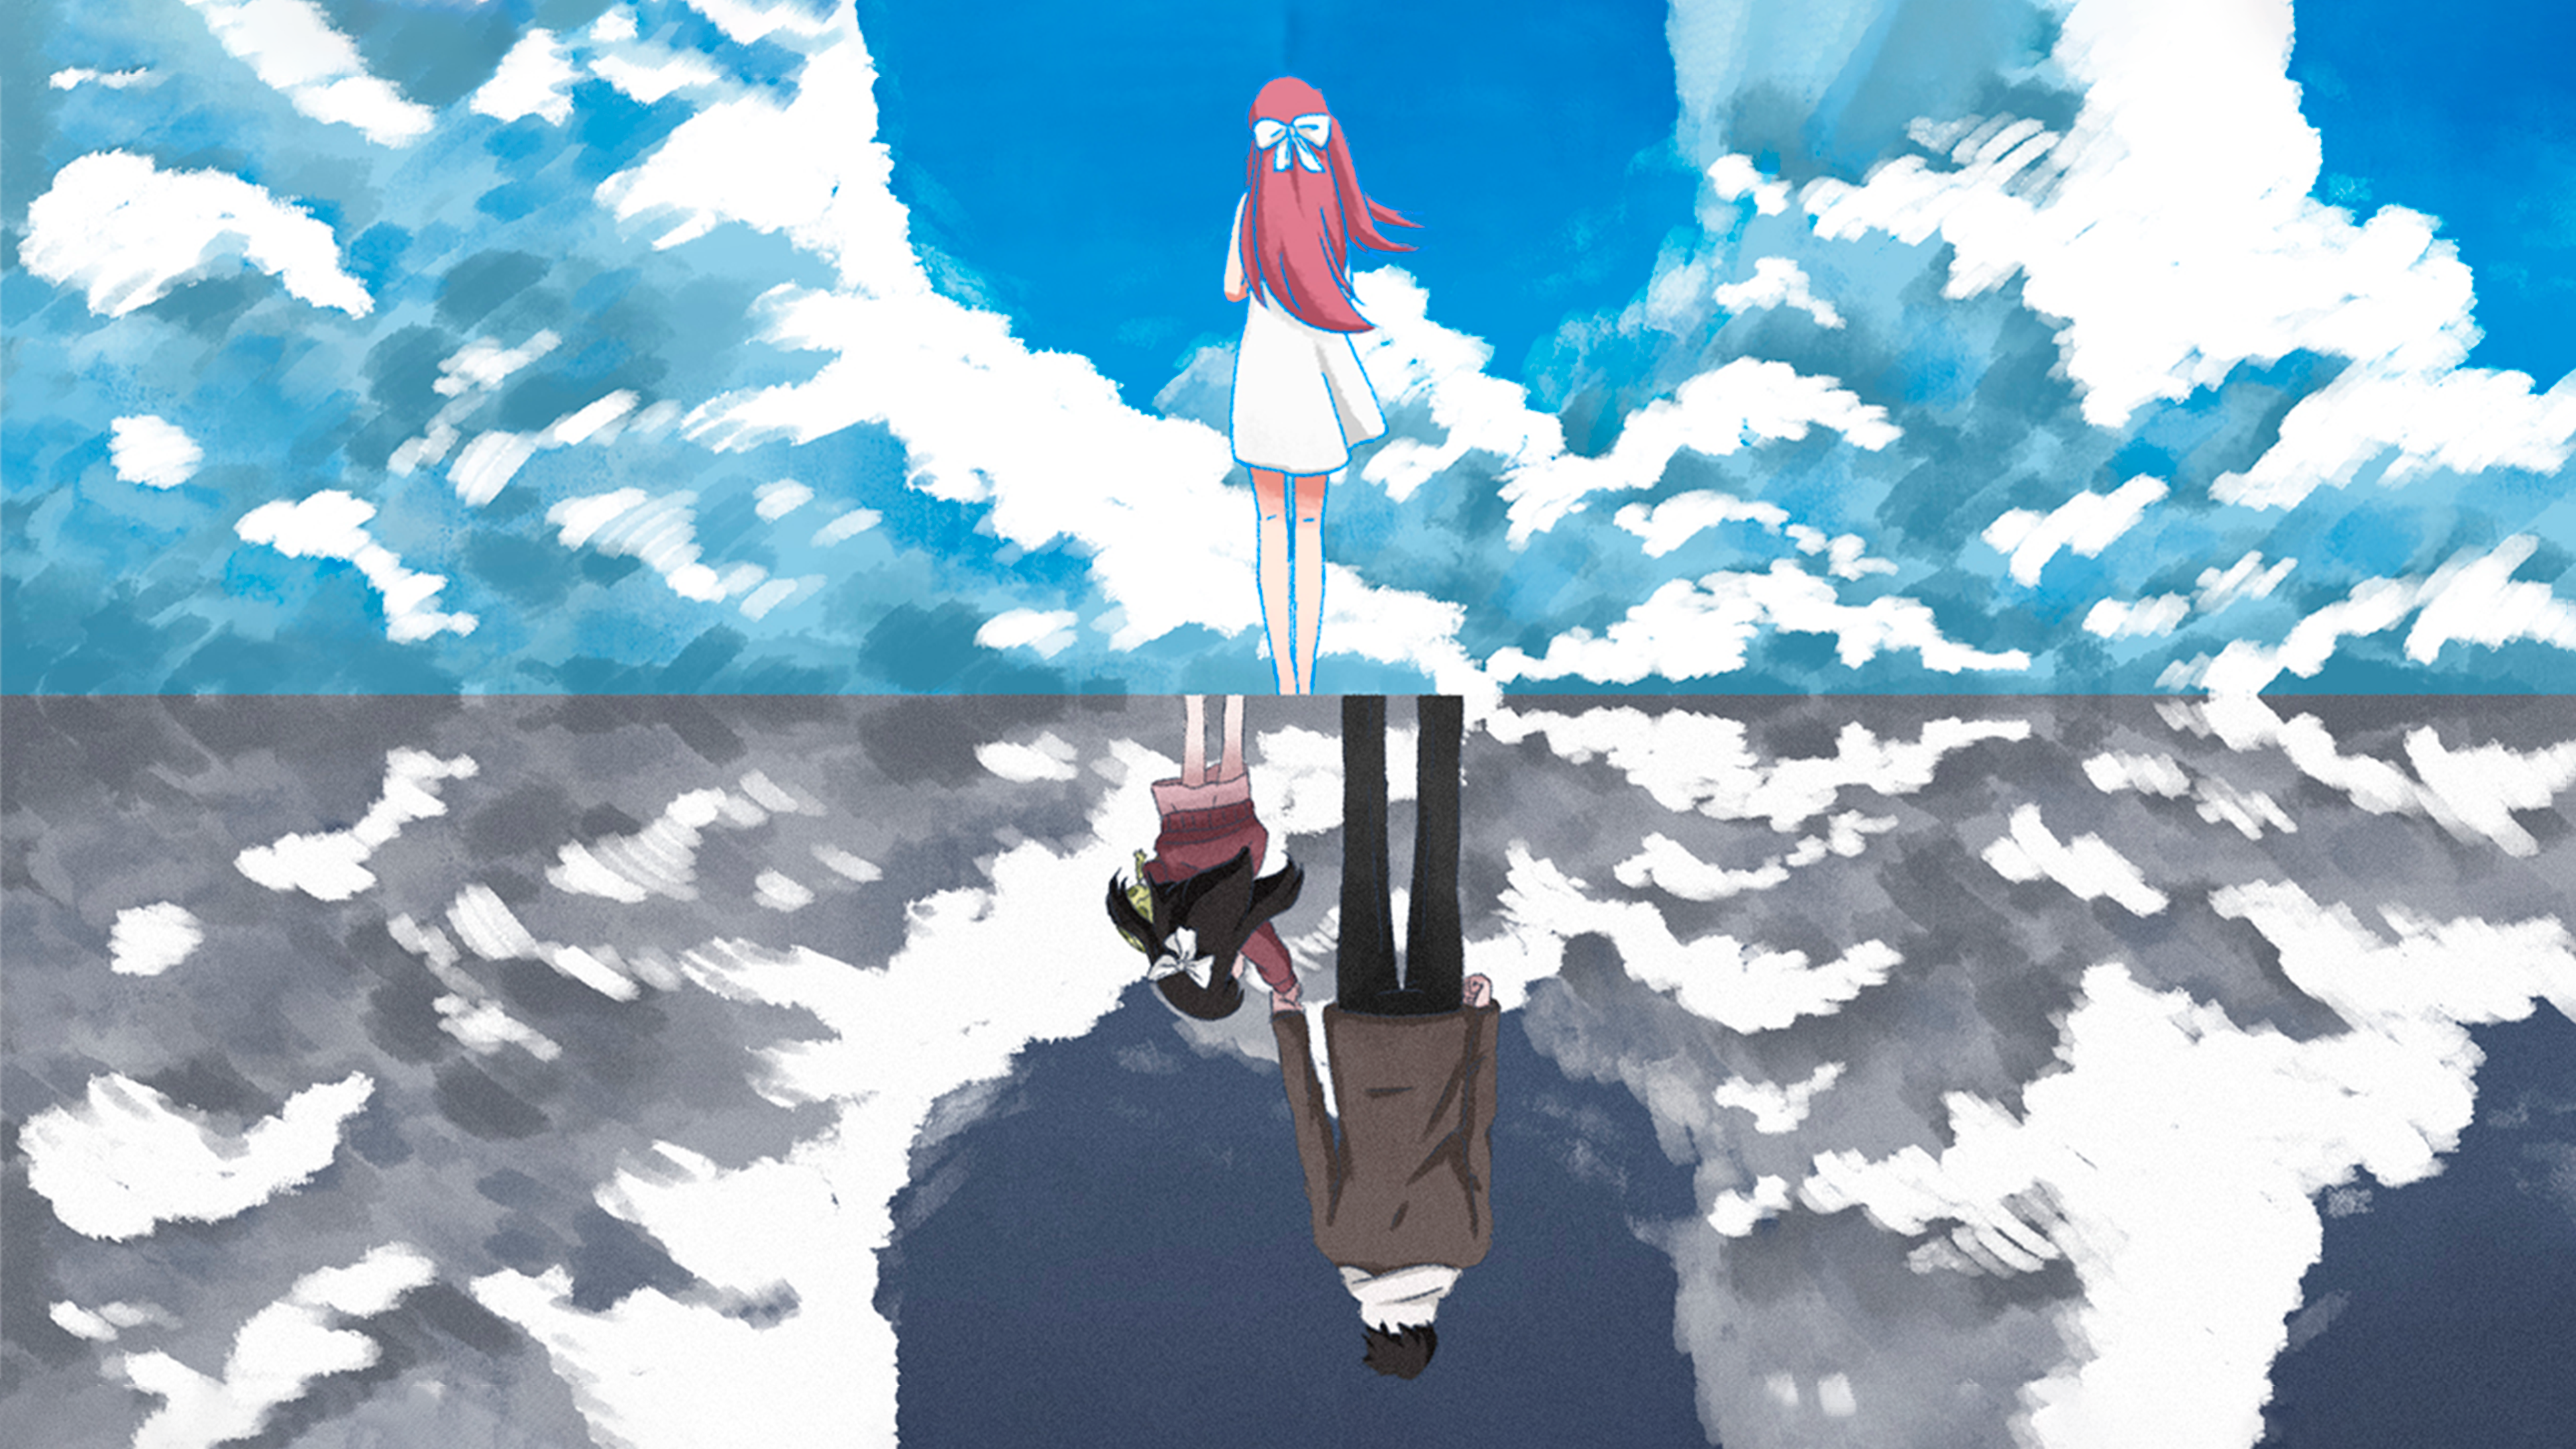 Shelter Anime Music Video Darling Sea Water Blue Clouds Father NinA Rose 3840x2160